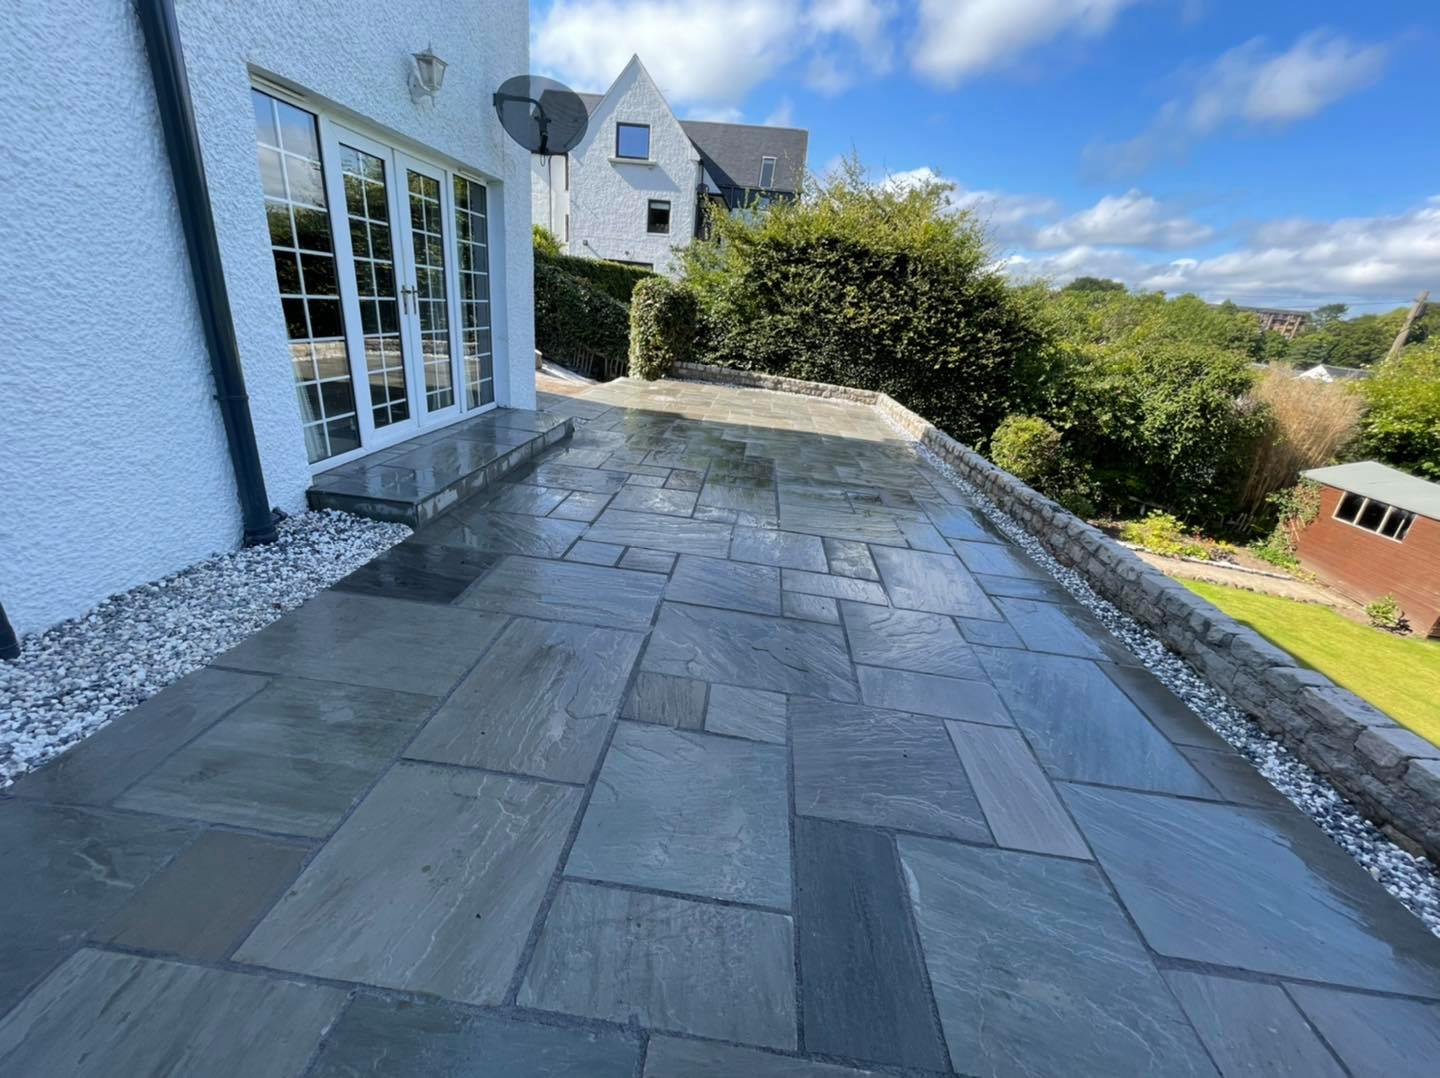 A little break from porcelain this week with an Indian sandstone installation,complimenting the character of the building and surroundings